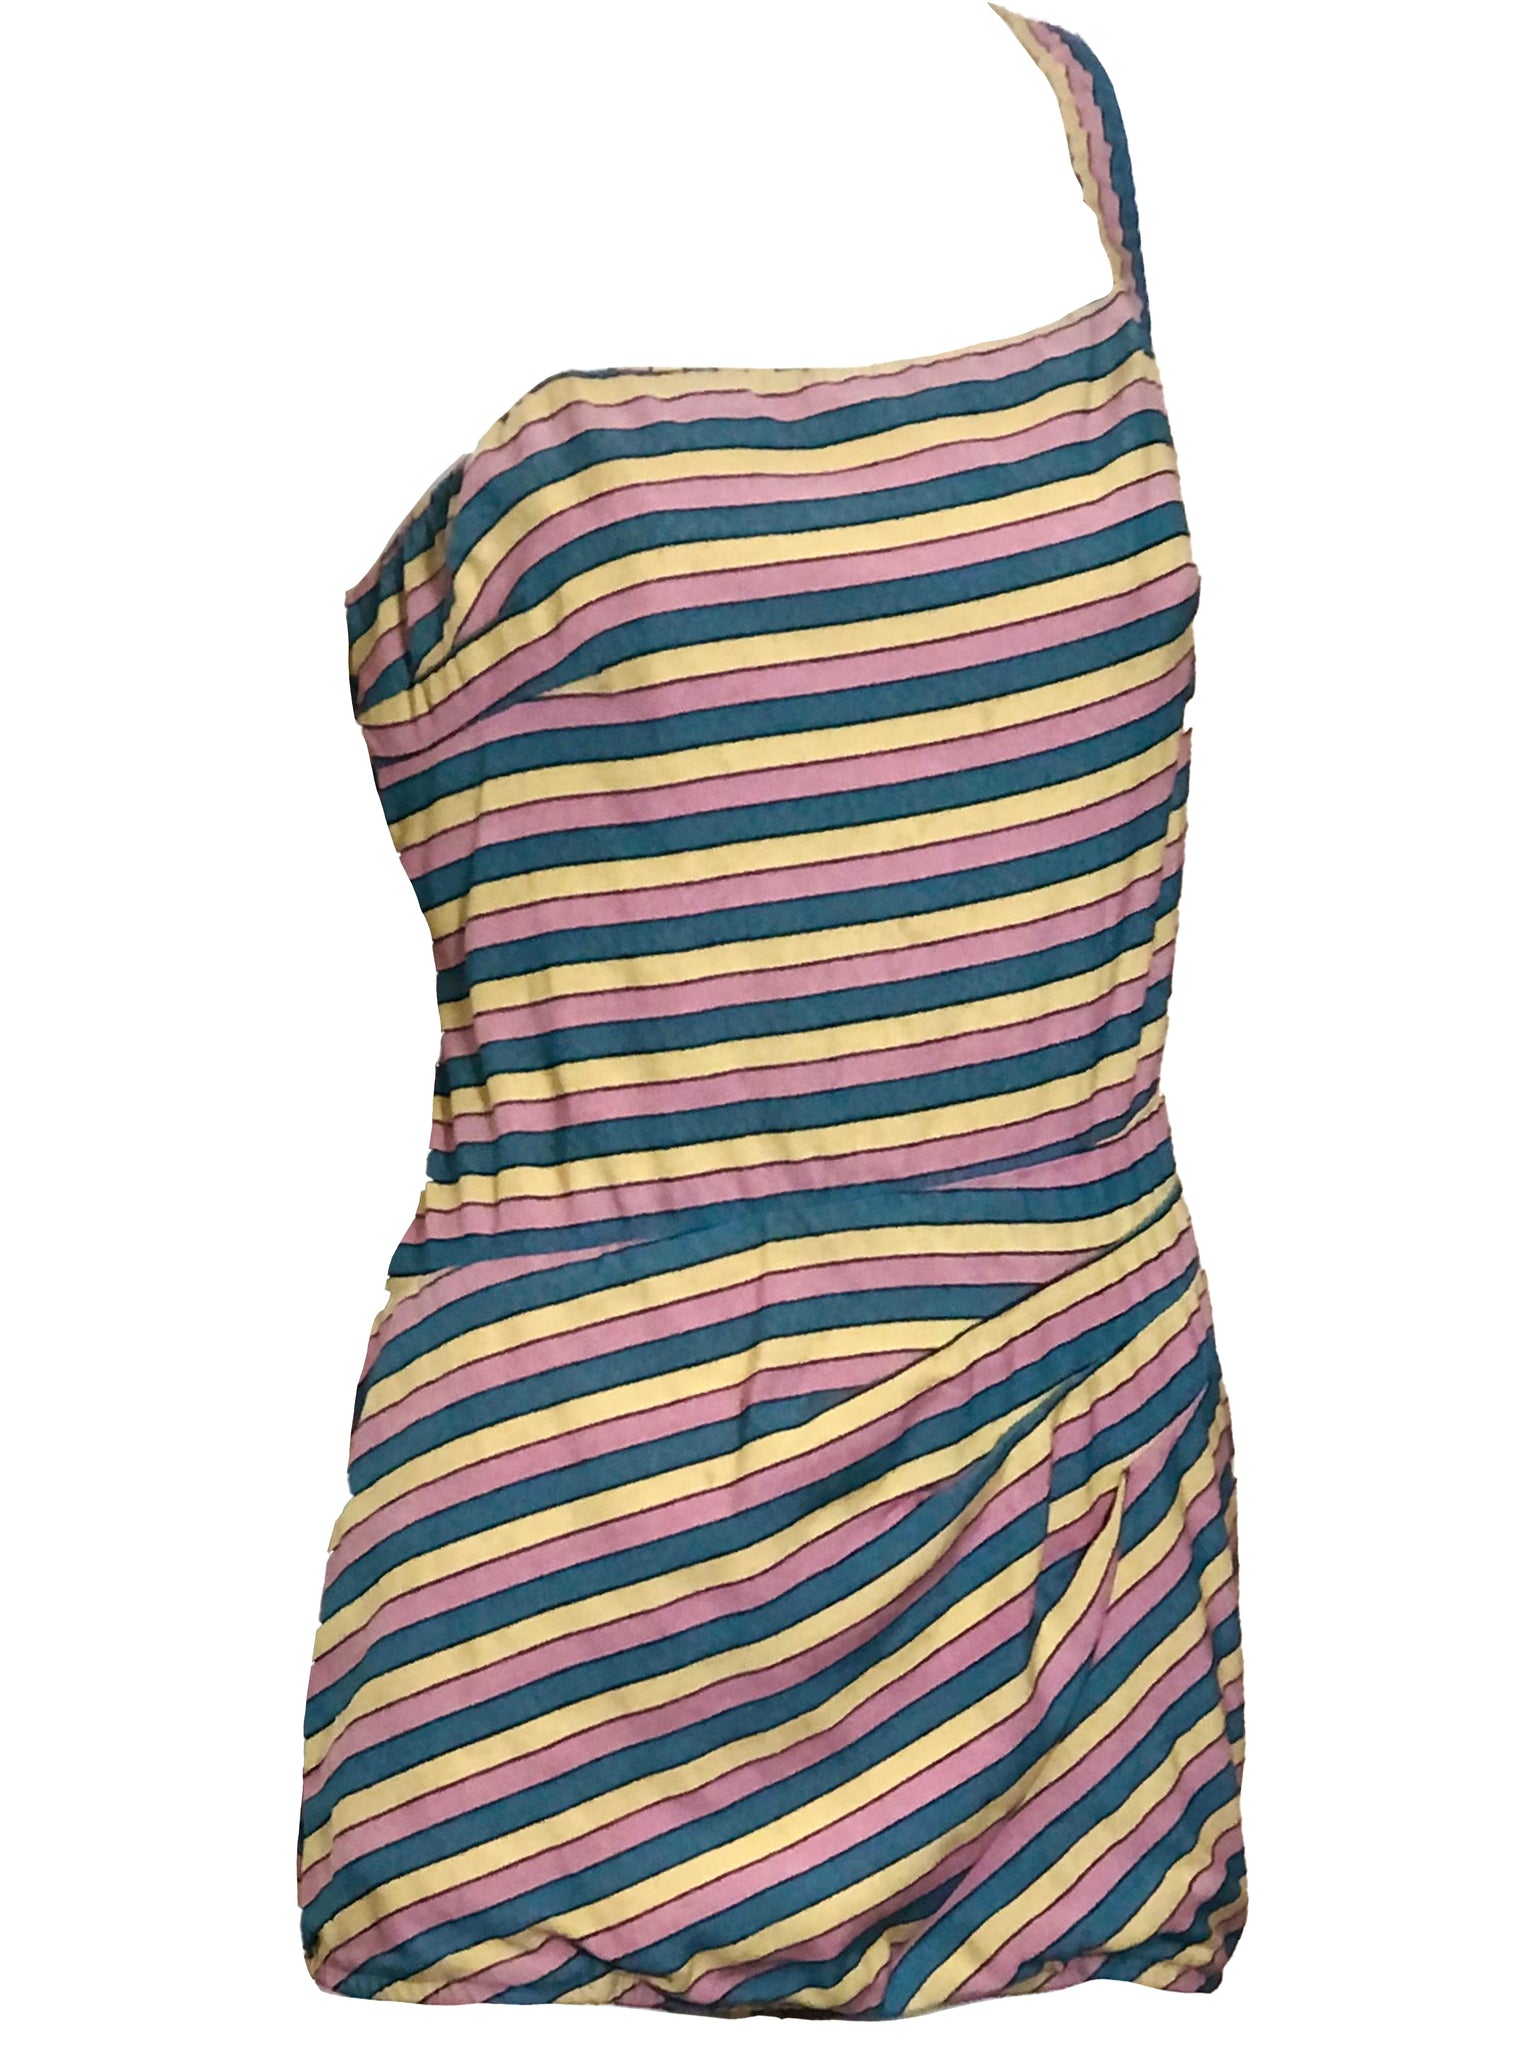 Rose Marie Reid 50s One Shoulder Striped Swimsuit ANGLE 2 of 5